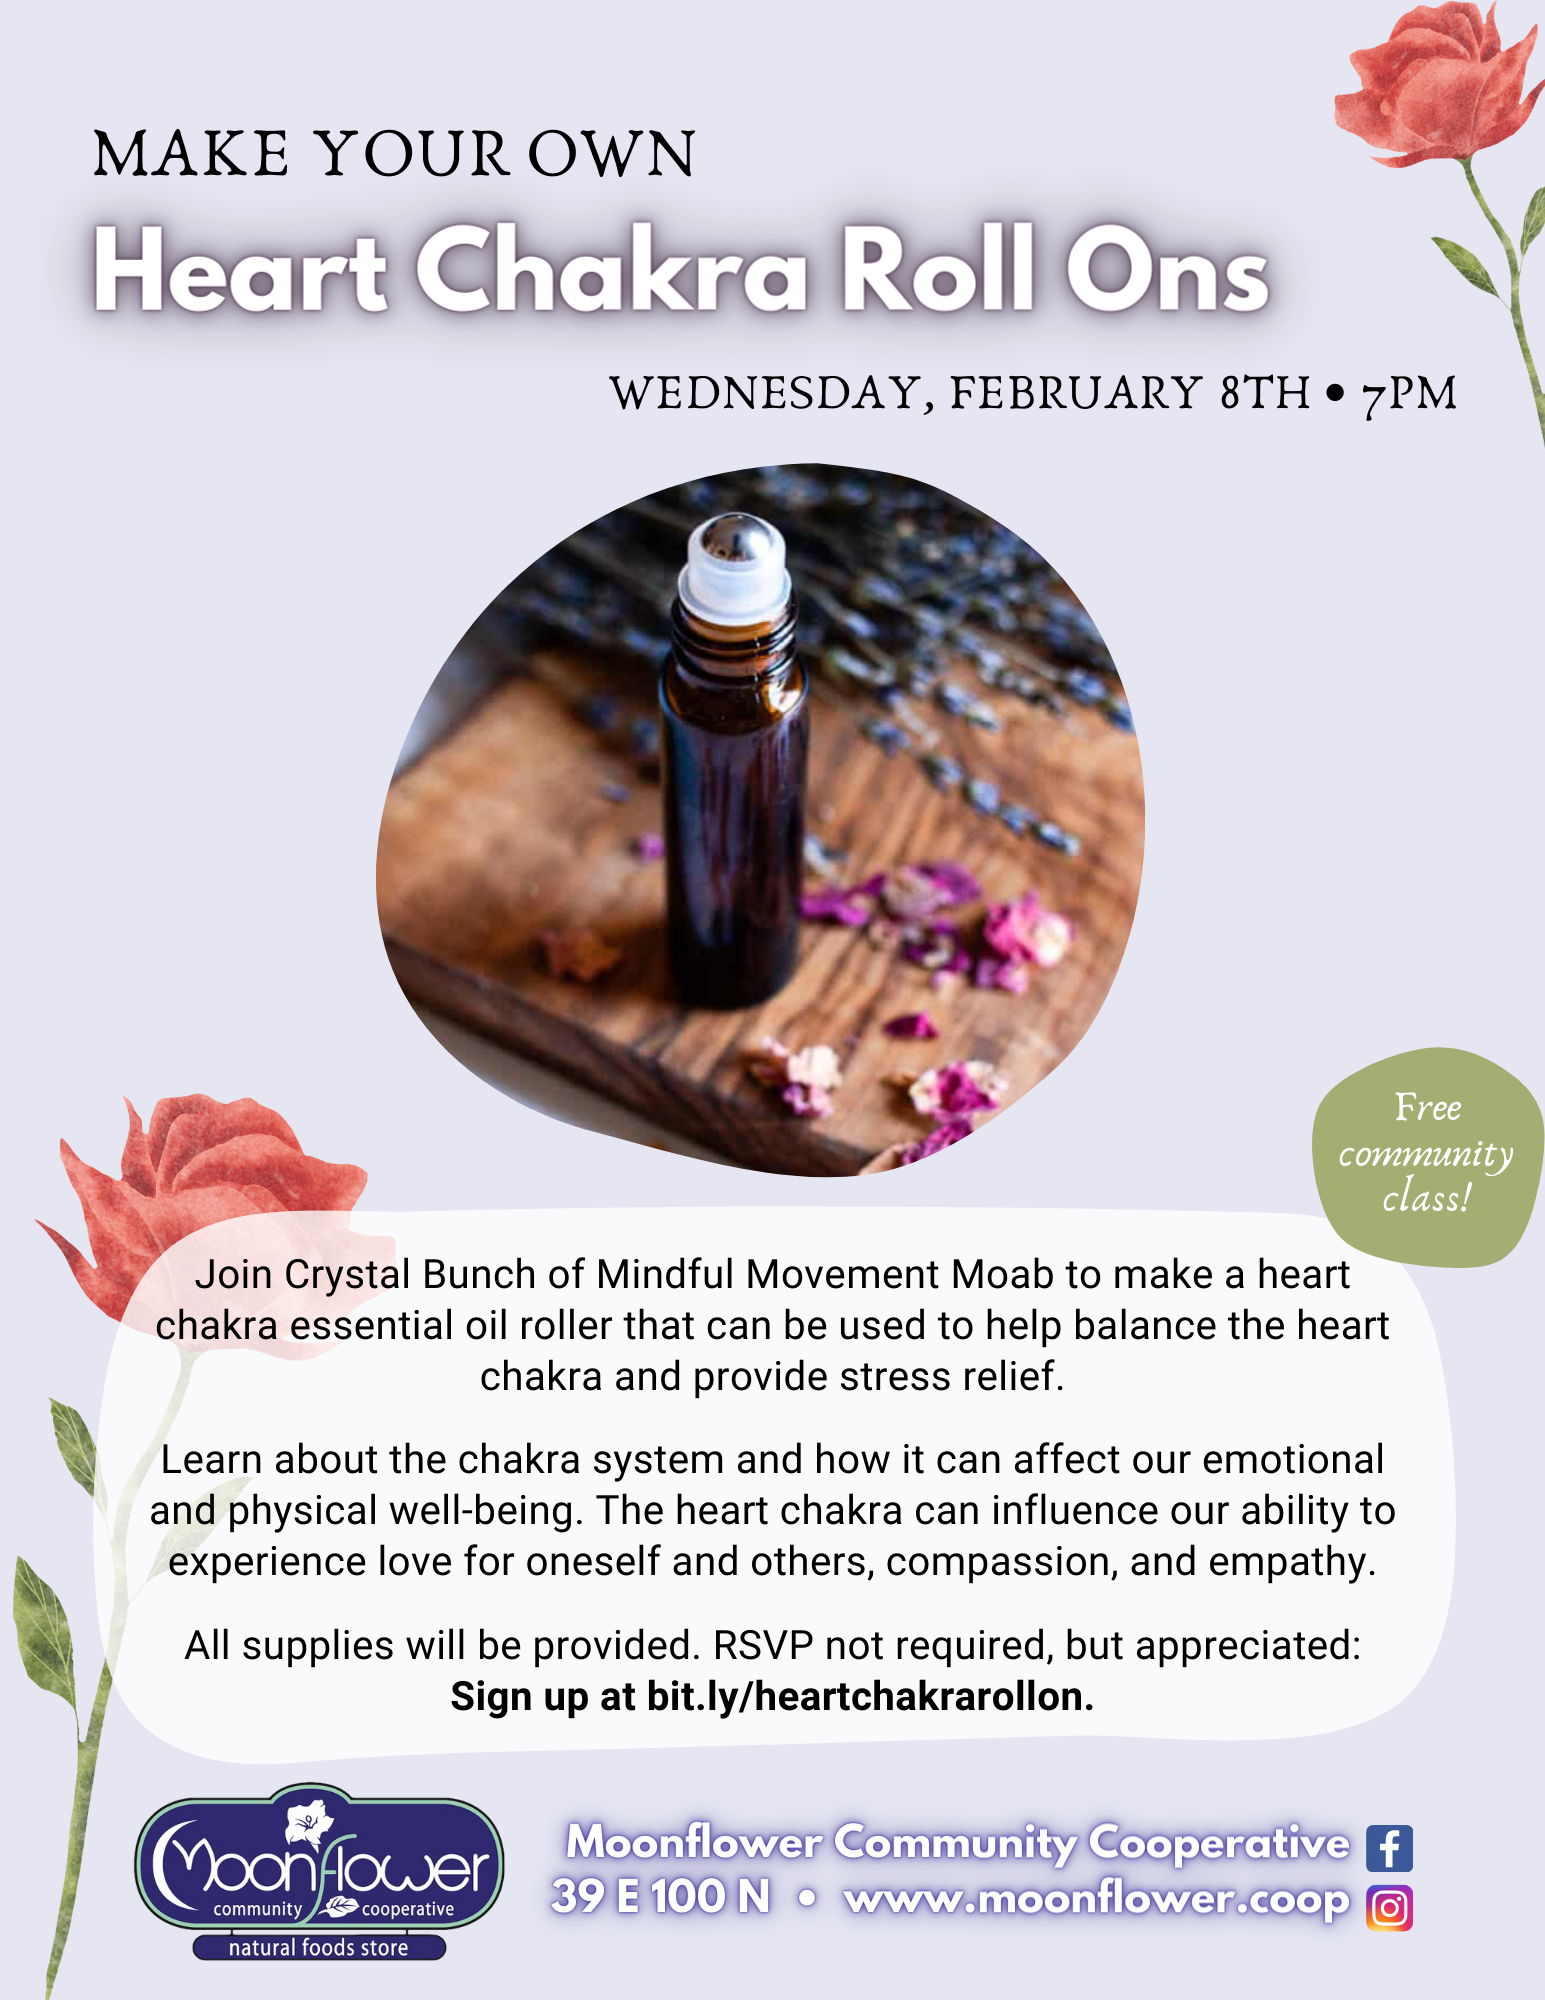 Make Your Own Heart Chakra Roll Ons